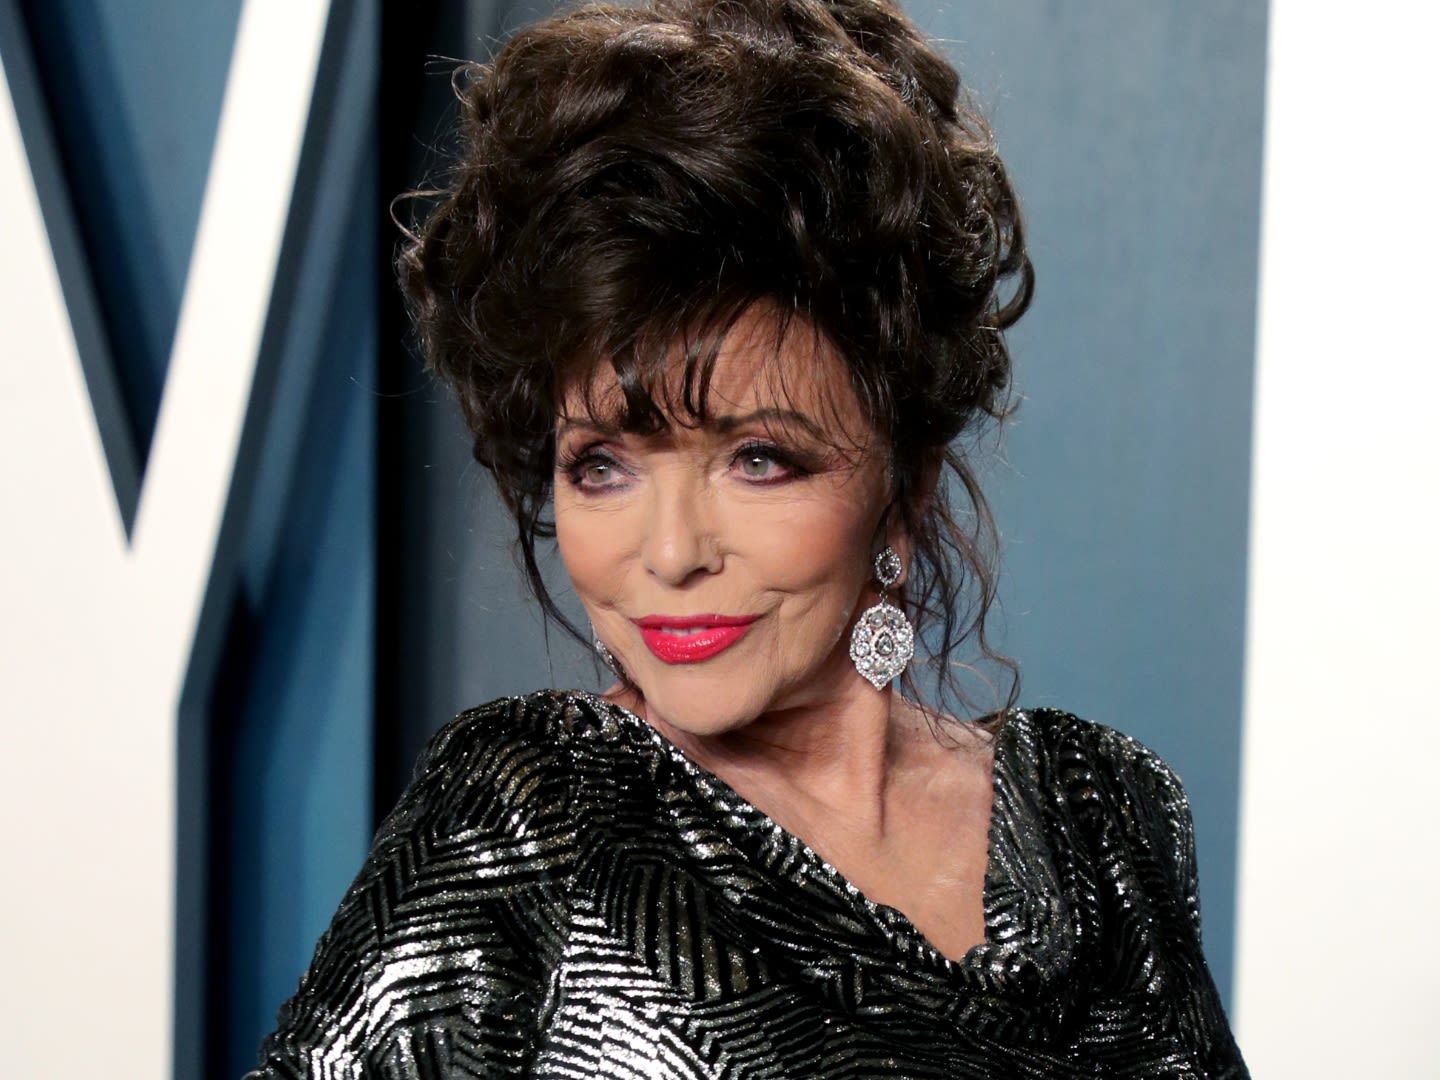 Joan Collins' Bombshell Memoir Spills All the Details About Hollywood, Marilyn Monroe, & More — It’s 30% Off Today